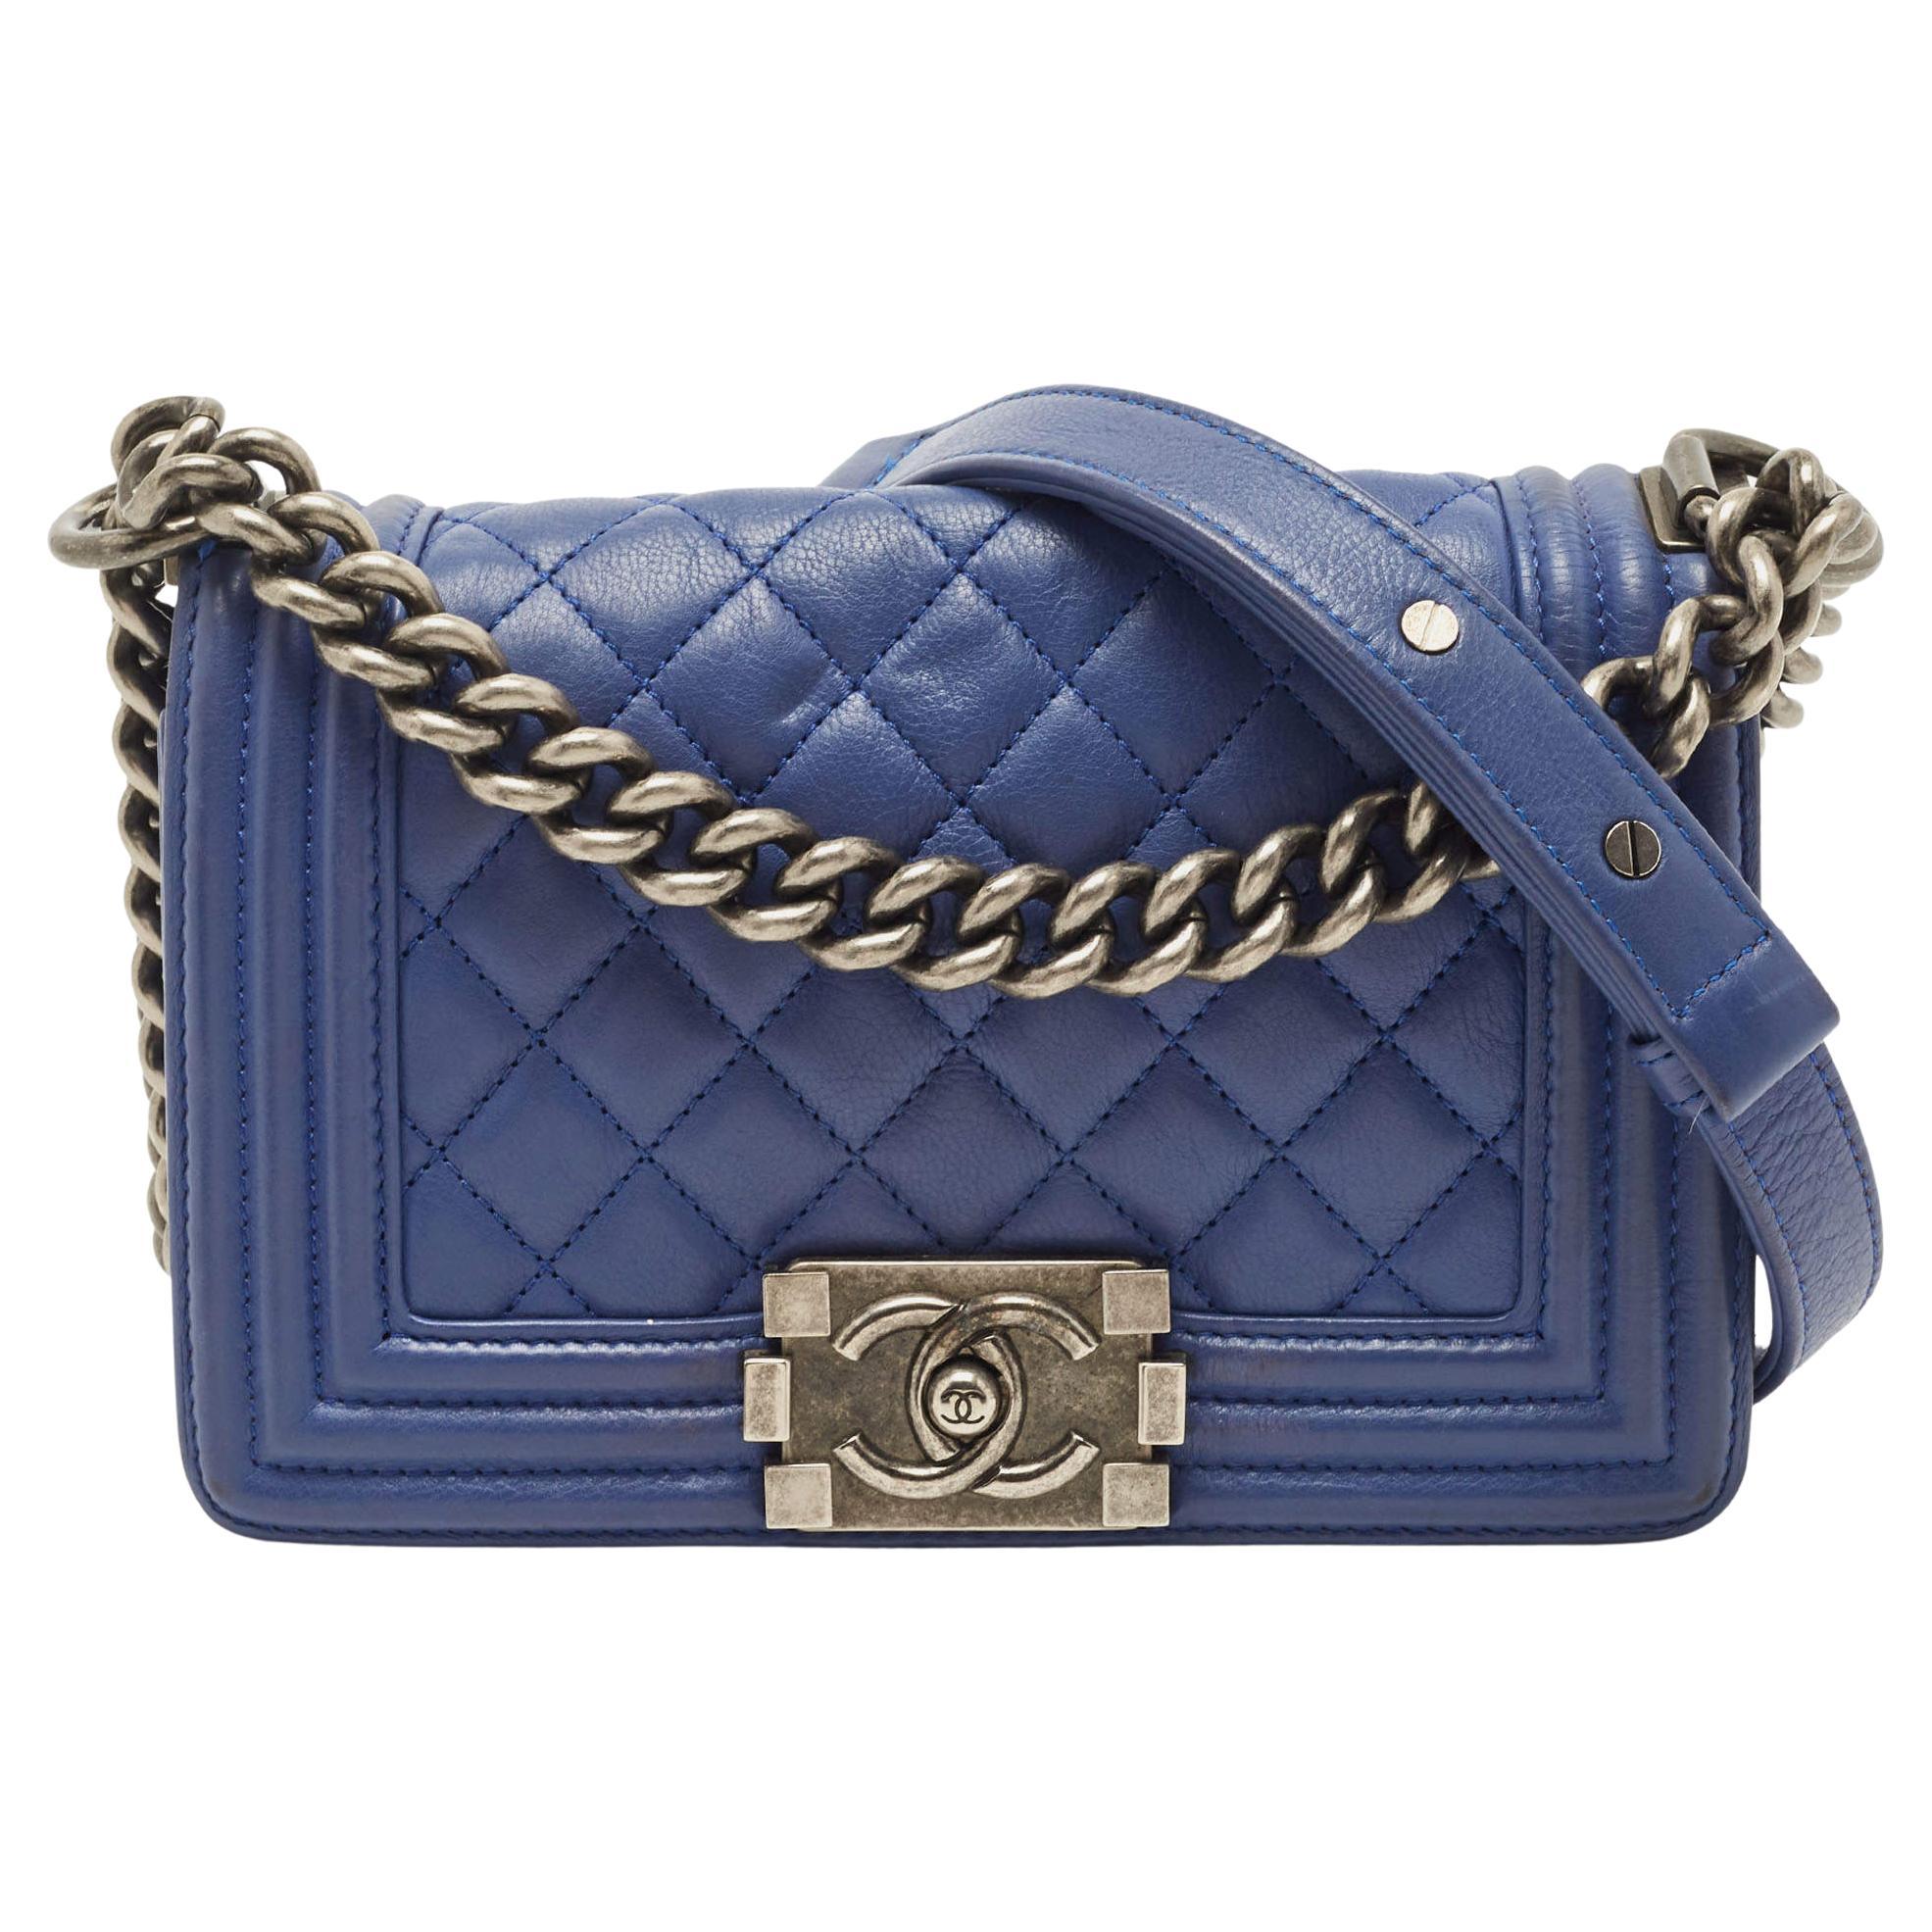 Chanel Blue Quilted Leather Small Boy Flap Bag